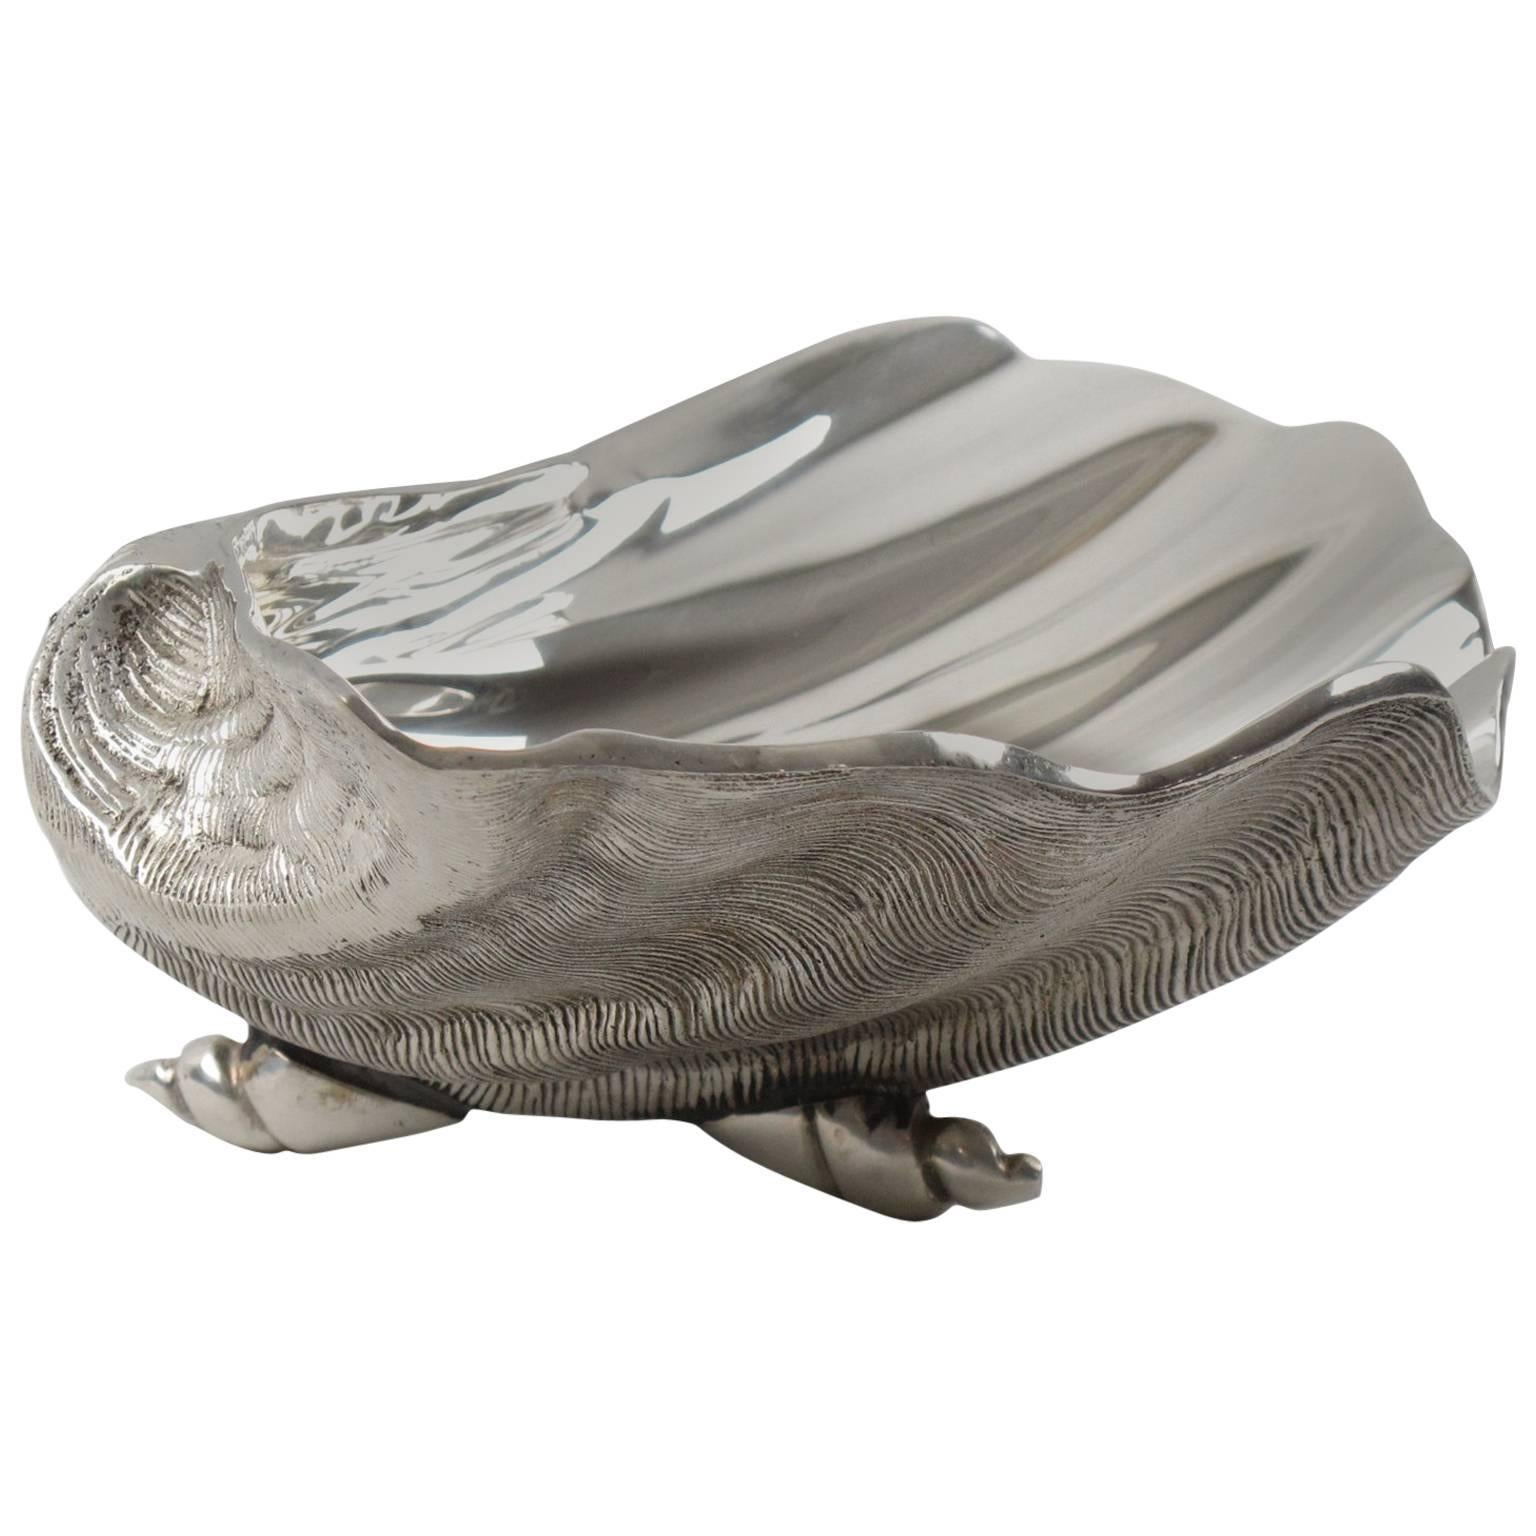 Italian 1970s Silver Plate Large Clam Shell Bowl Catchall